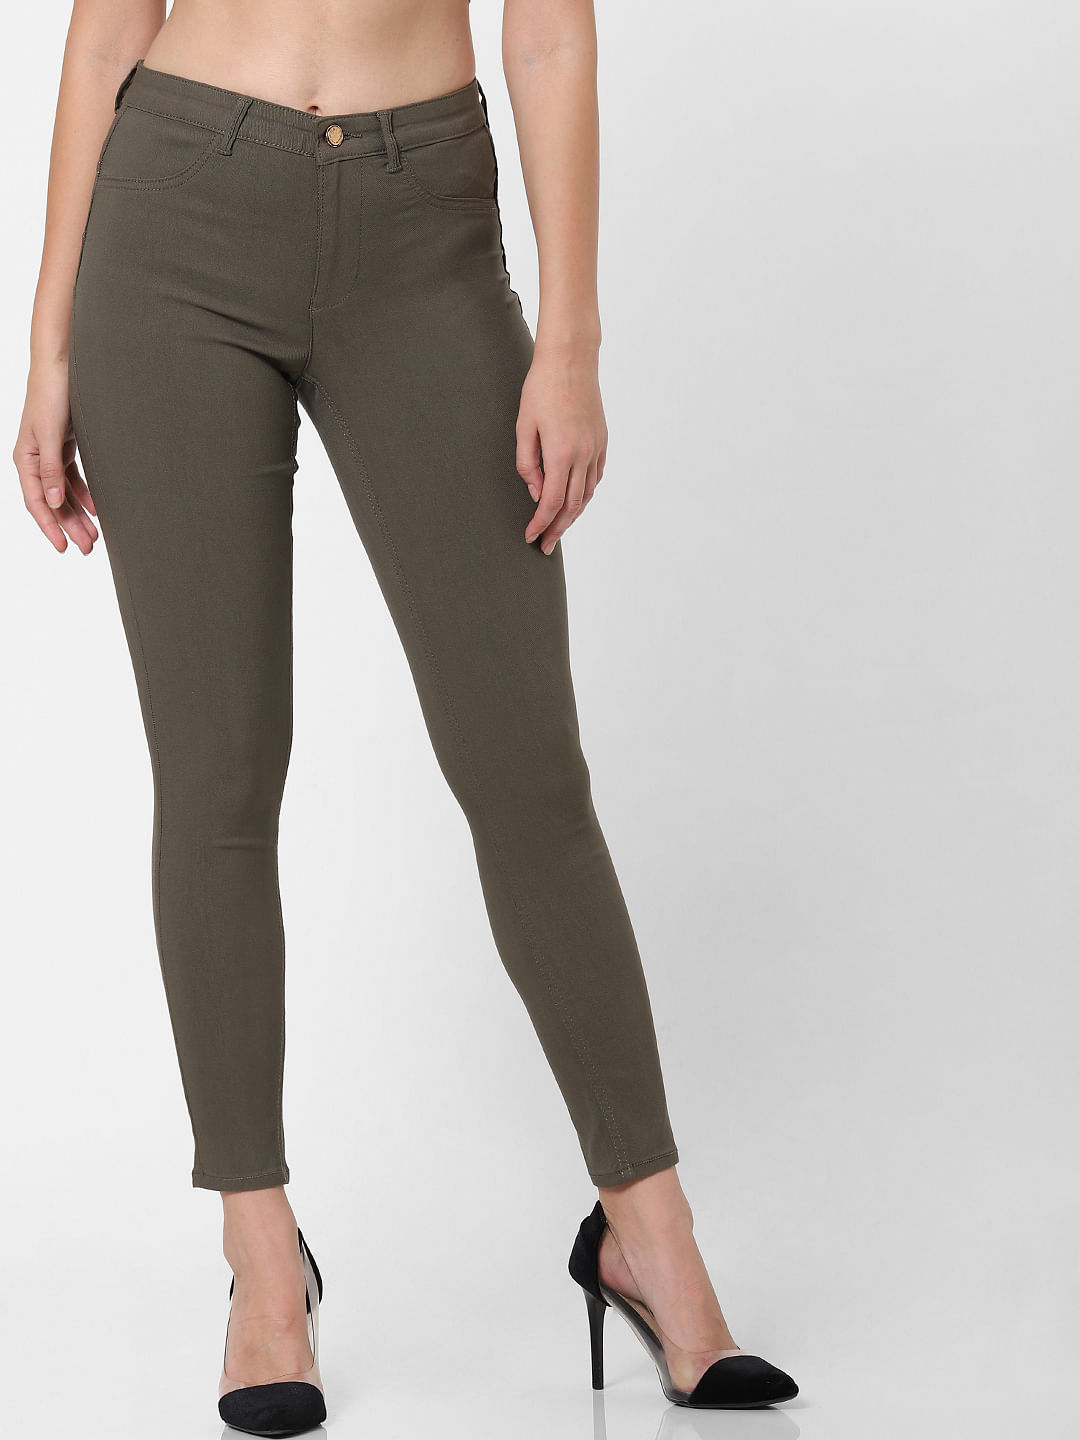 Buy Olive Green Track Pants for Women by Teamspirit Online | Ajio.com